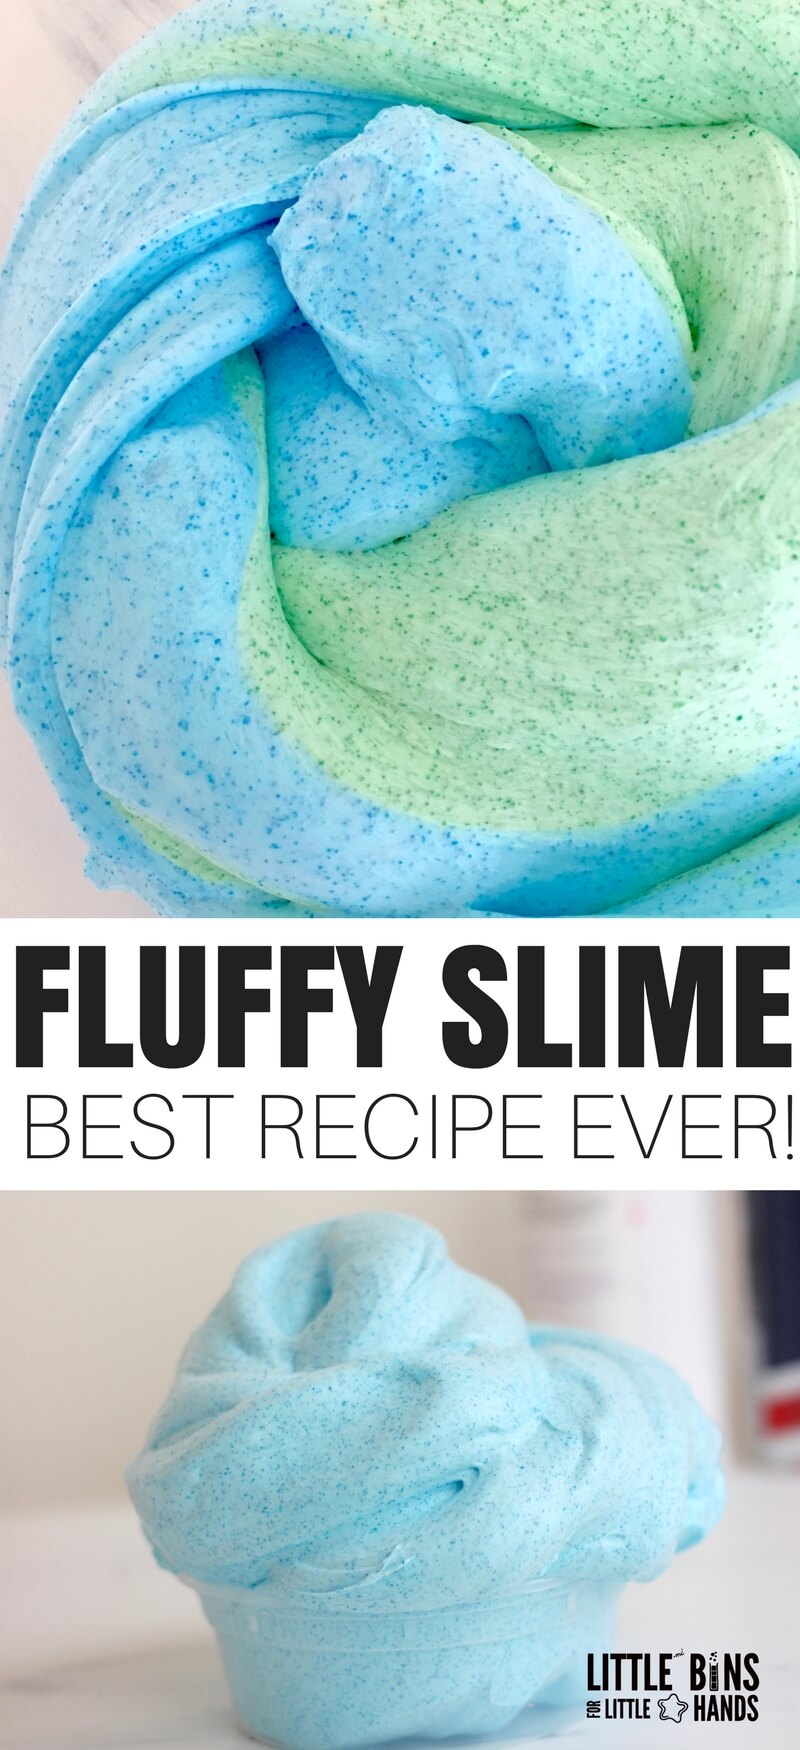 Fluffy slime, have you tried it? This homemade fluffy slime recipe is a must try for kids. Ours is the lightest, fluffiest, and easiest to make slime you will ever need. Our goal is to show you how to make the best homemade slime ever, and our recipes and videos show you how. Join us in a batch of fluffy slime, and you will be a real hero with the kids!